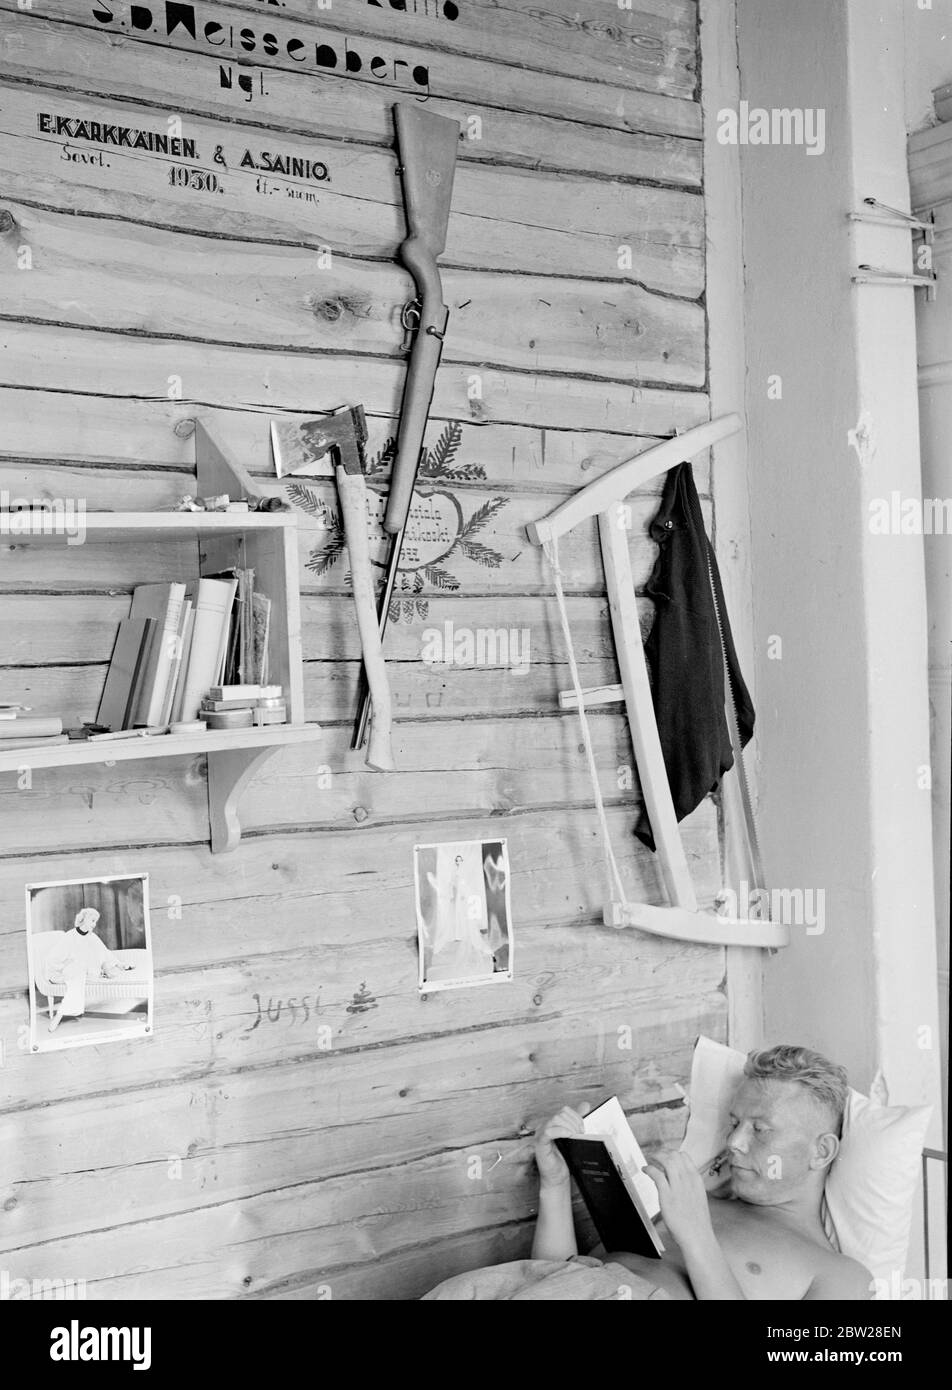 Worlds greatest foresters. Finland - Finnish daily life Forest Academy of Korkeakoski 1939 Gun, axe, saw - and american film stars. Korkeakoski's summer school of forestry is 5 miles from the station and 200 miles from Helsinki. There are no cinemas, no dancing places, yet there are 60 muscular and healthy young men whose only entertainment is an occasional dip into the lake. No wonder then that next to the bed of most of the students is a hollywood pin up. From a series These Men Built the Mannerheim Line - the Finnish zone of frontier fortifications was designed and constructed entirely by t Stock Photo